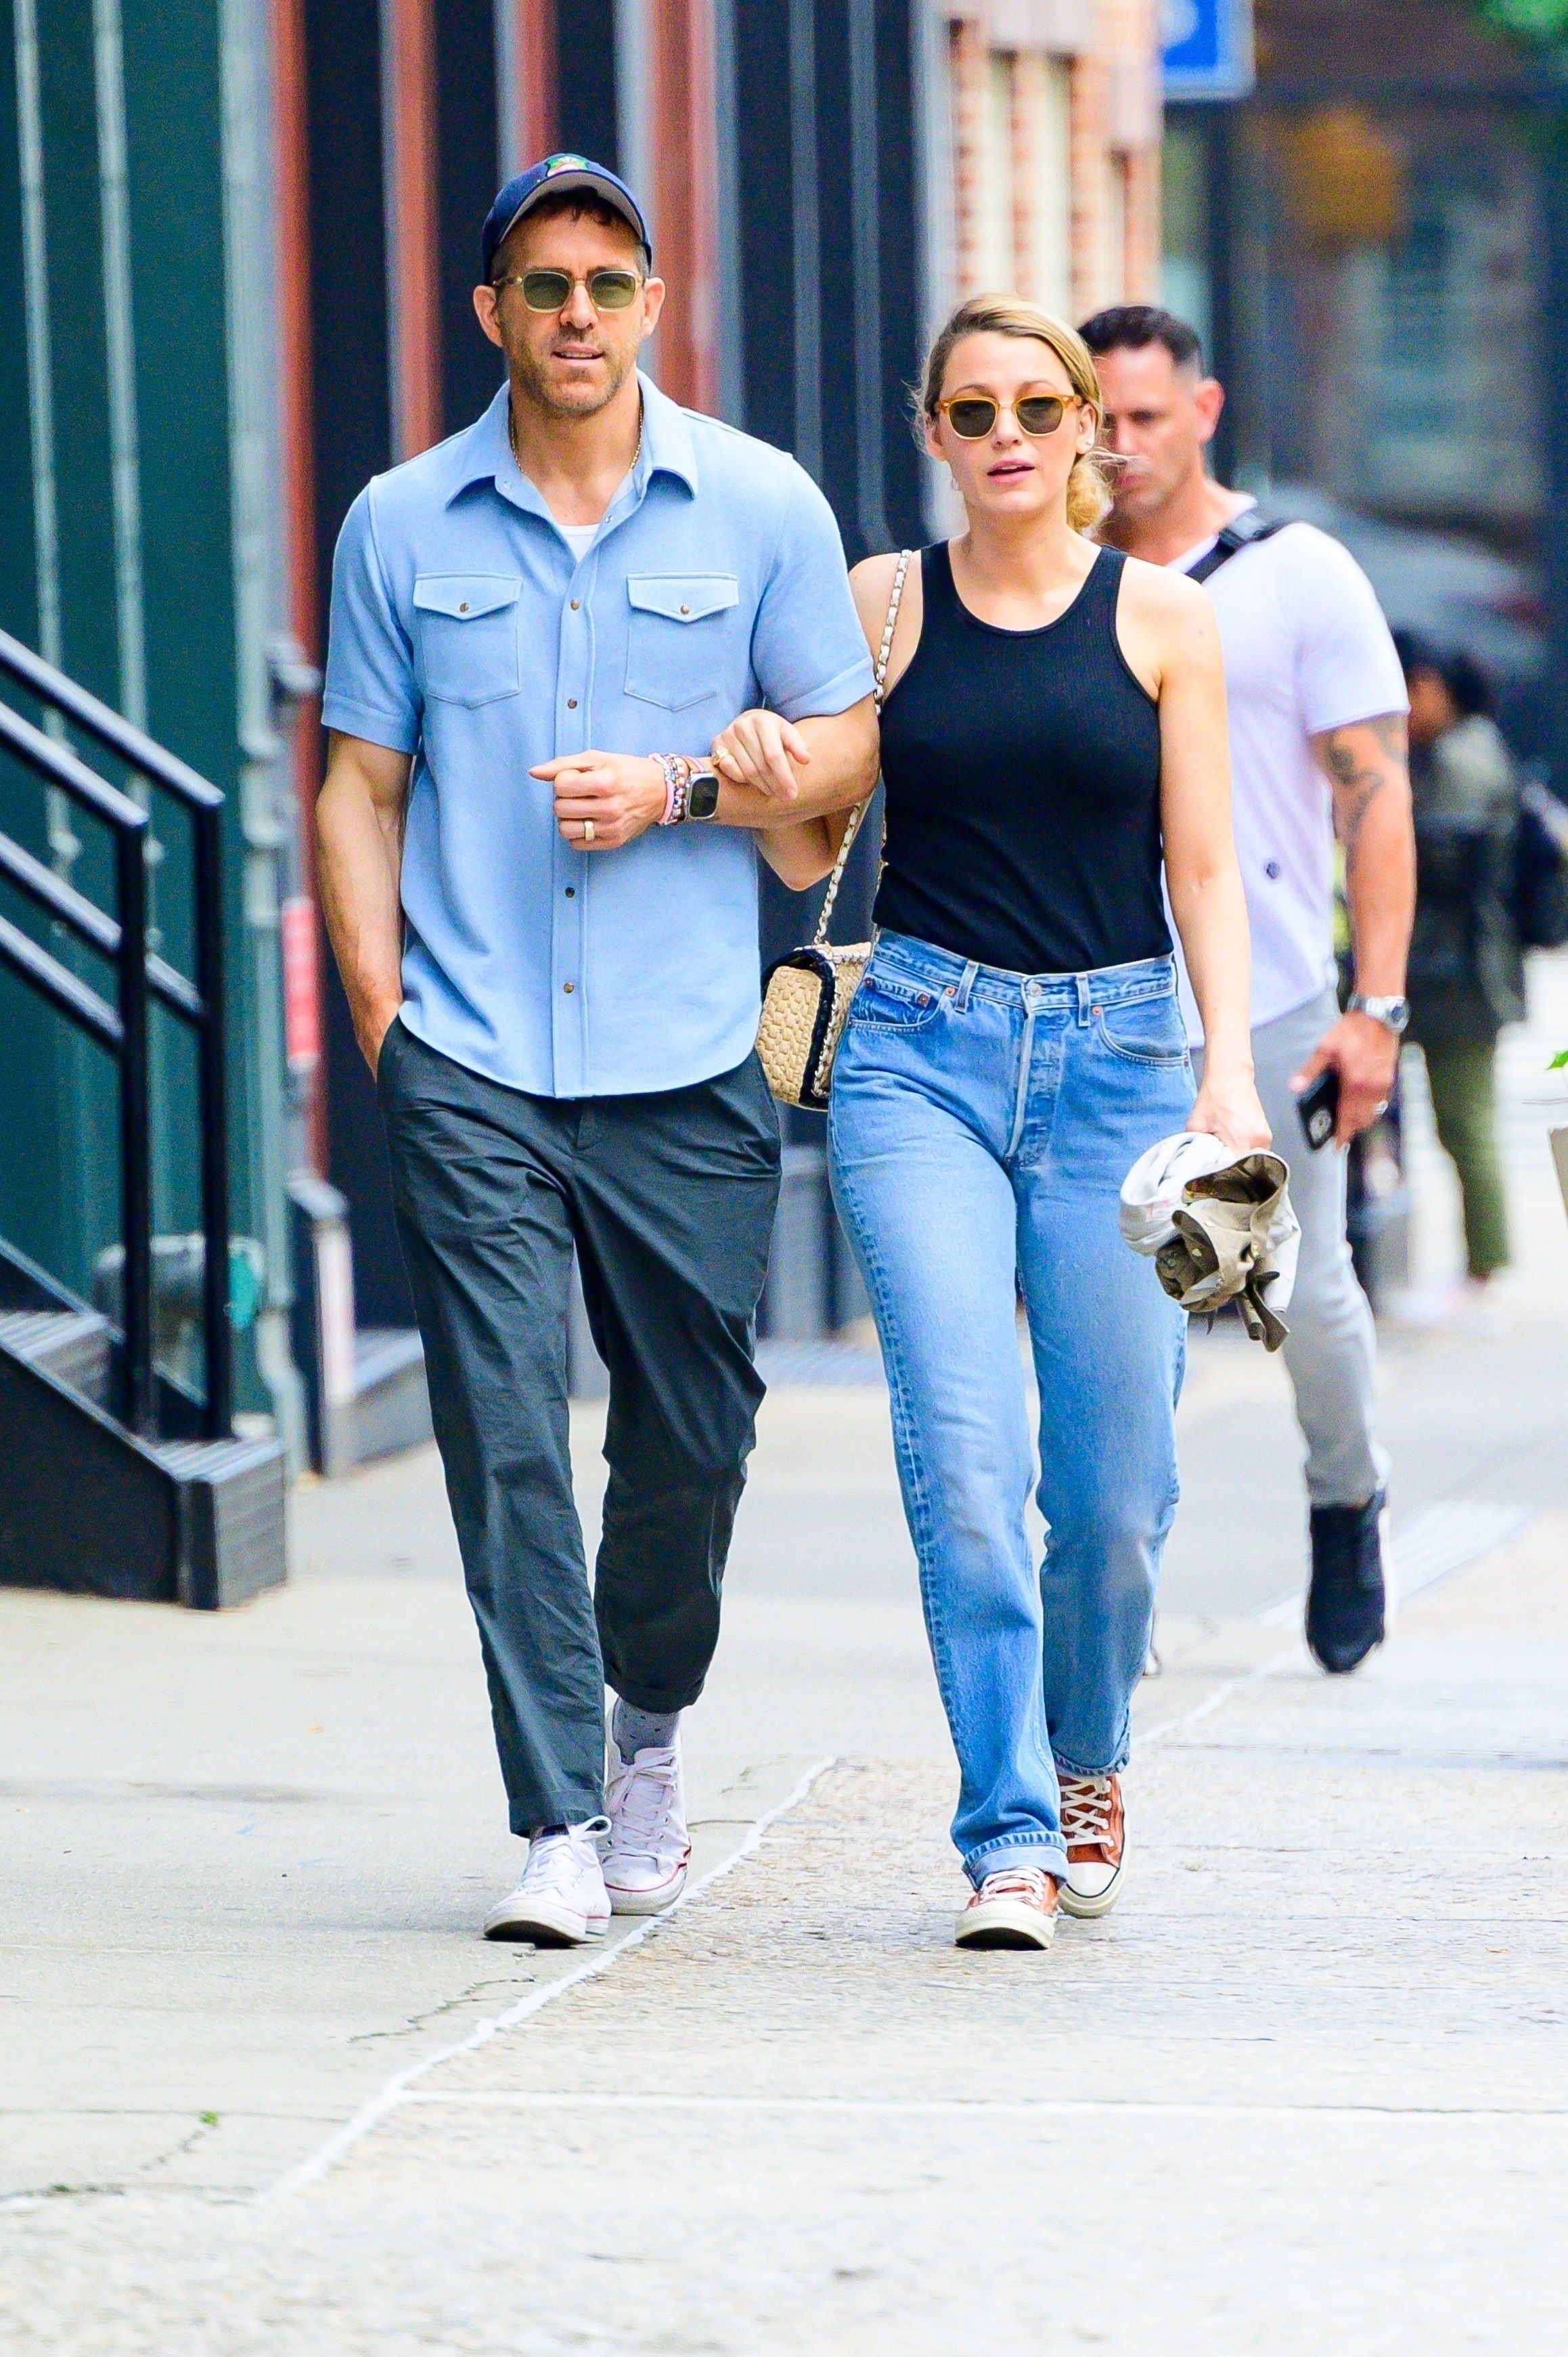 Blake Lively and Ryan Reynolds Wear Matching Sneakers on Day Out